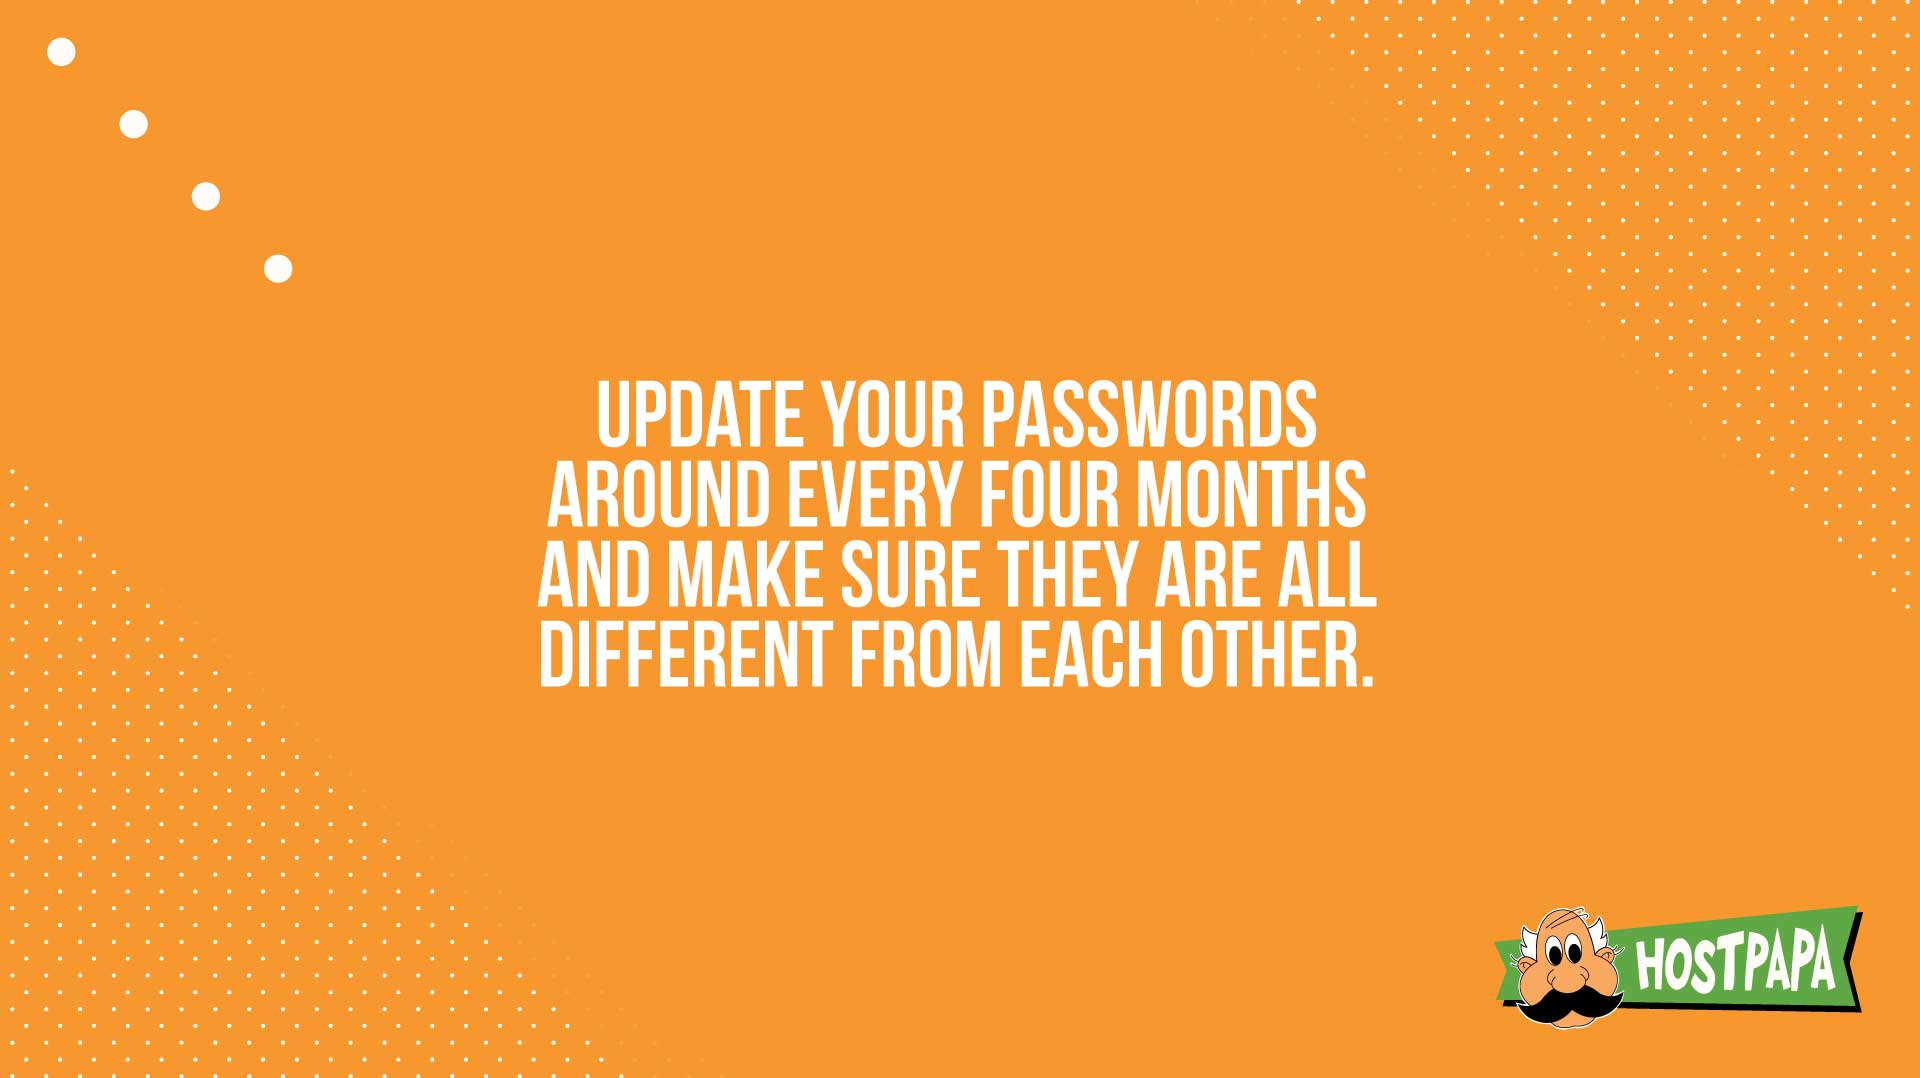 Update your passwords around every four months and make sure they are all different from each other